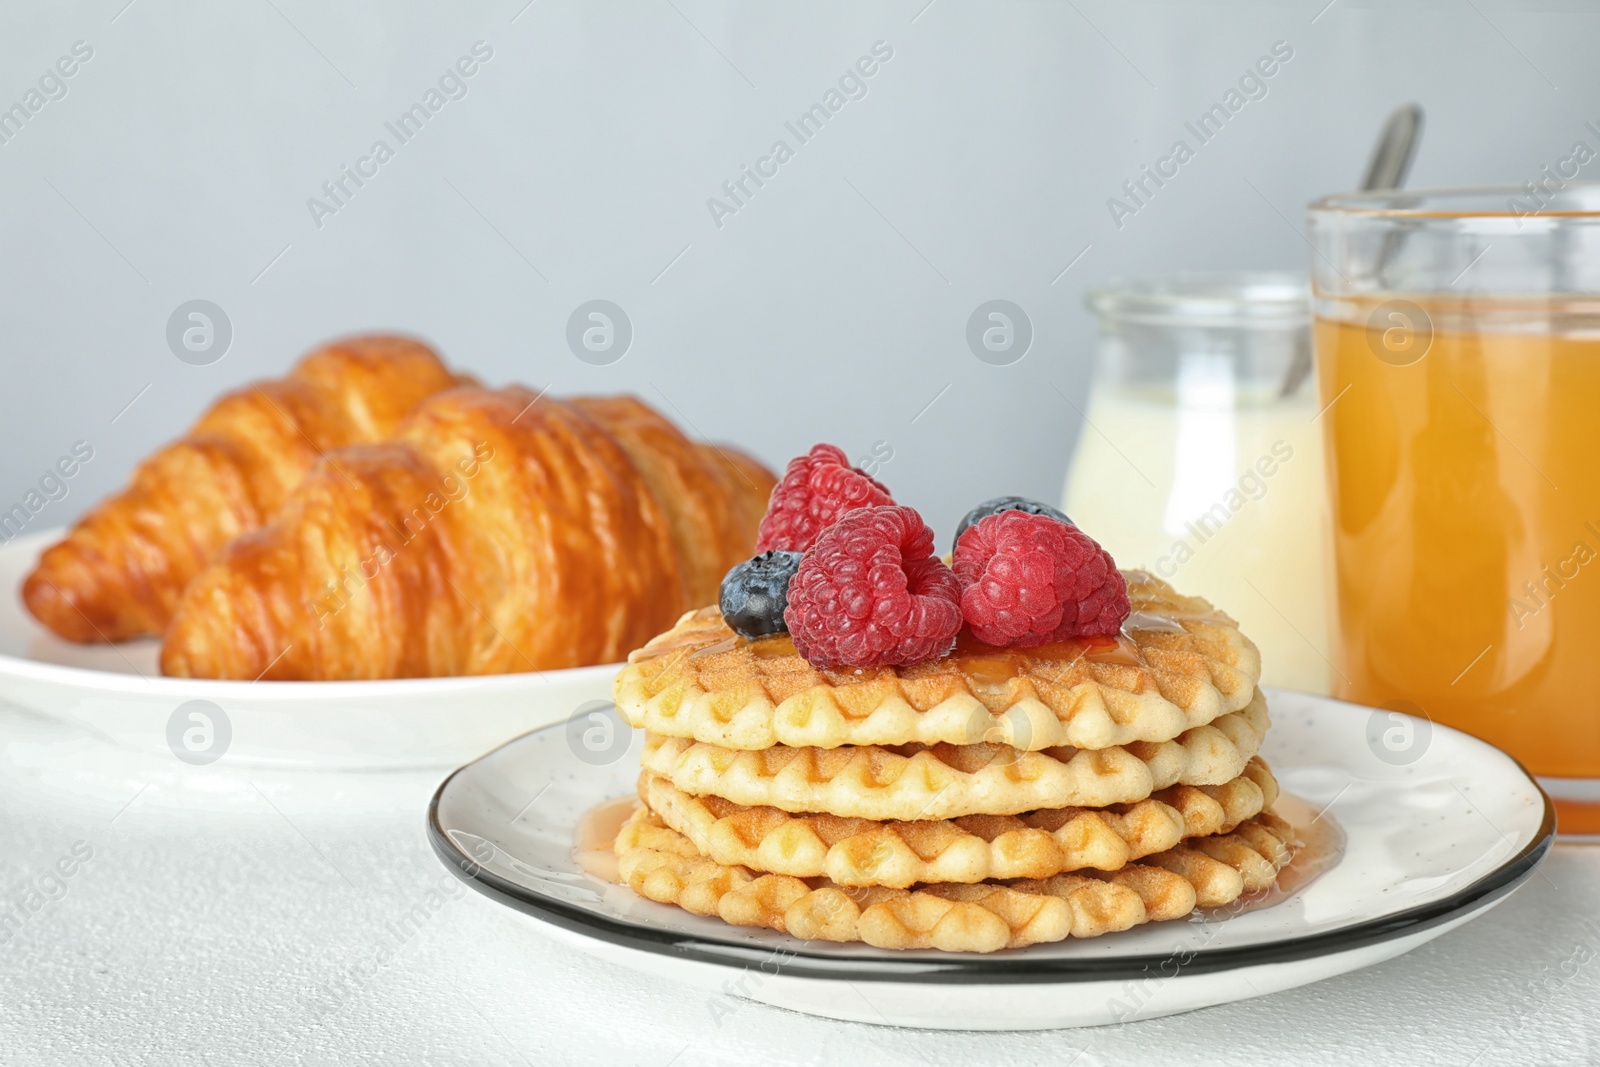 Photo of Delicious breakfast served on white table against light background